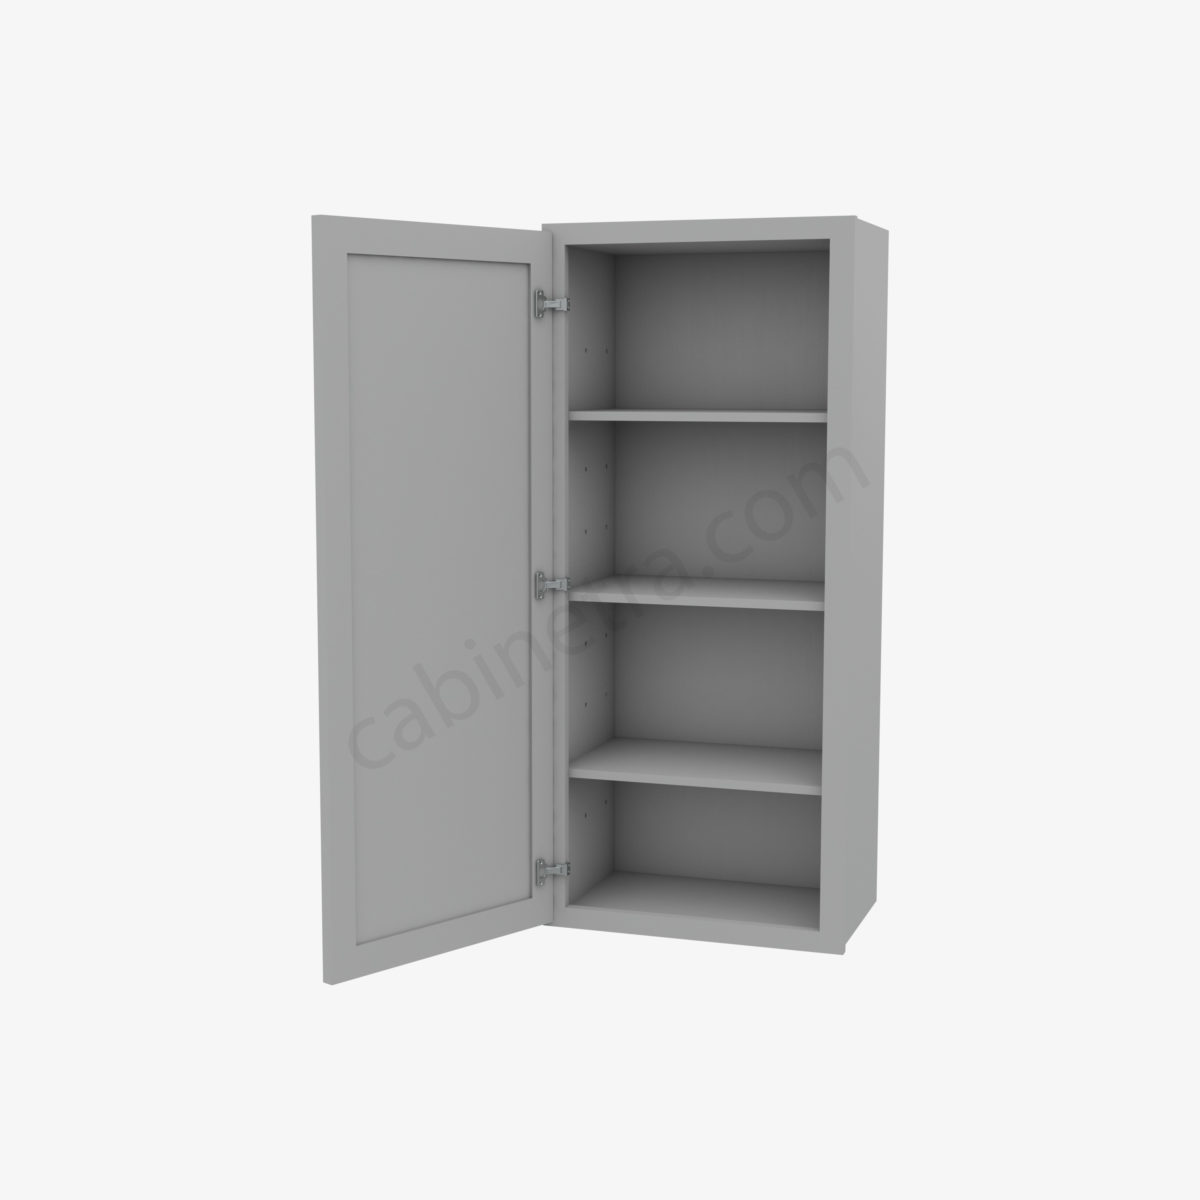 AB W1842 5 Forevermark Lait Gray Shaker Cabinetra scaled